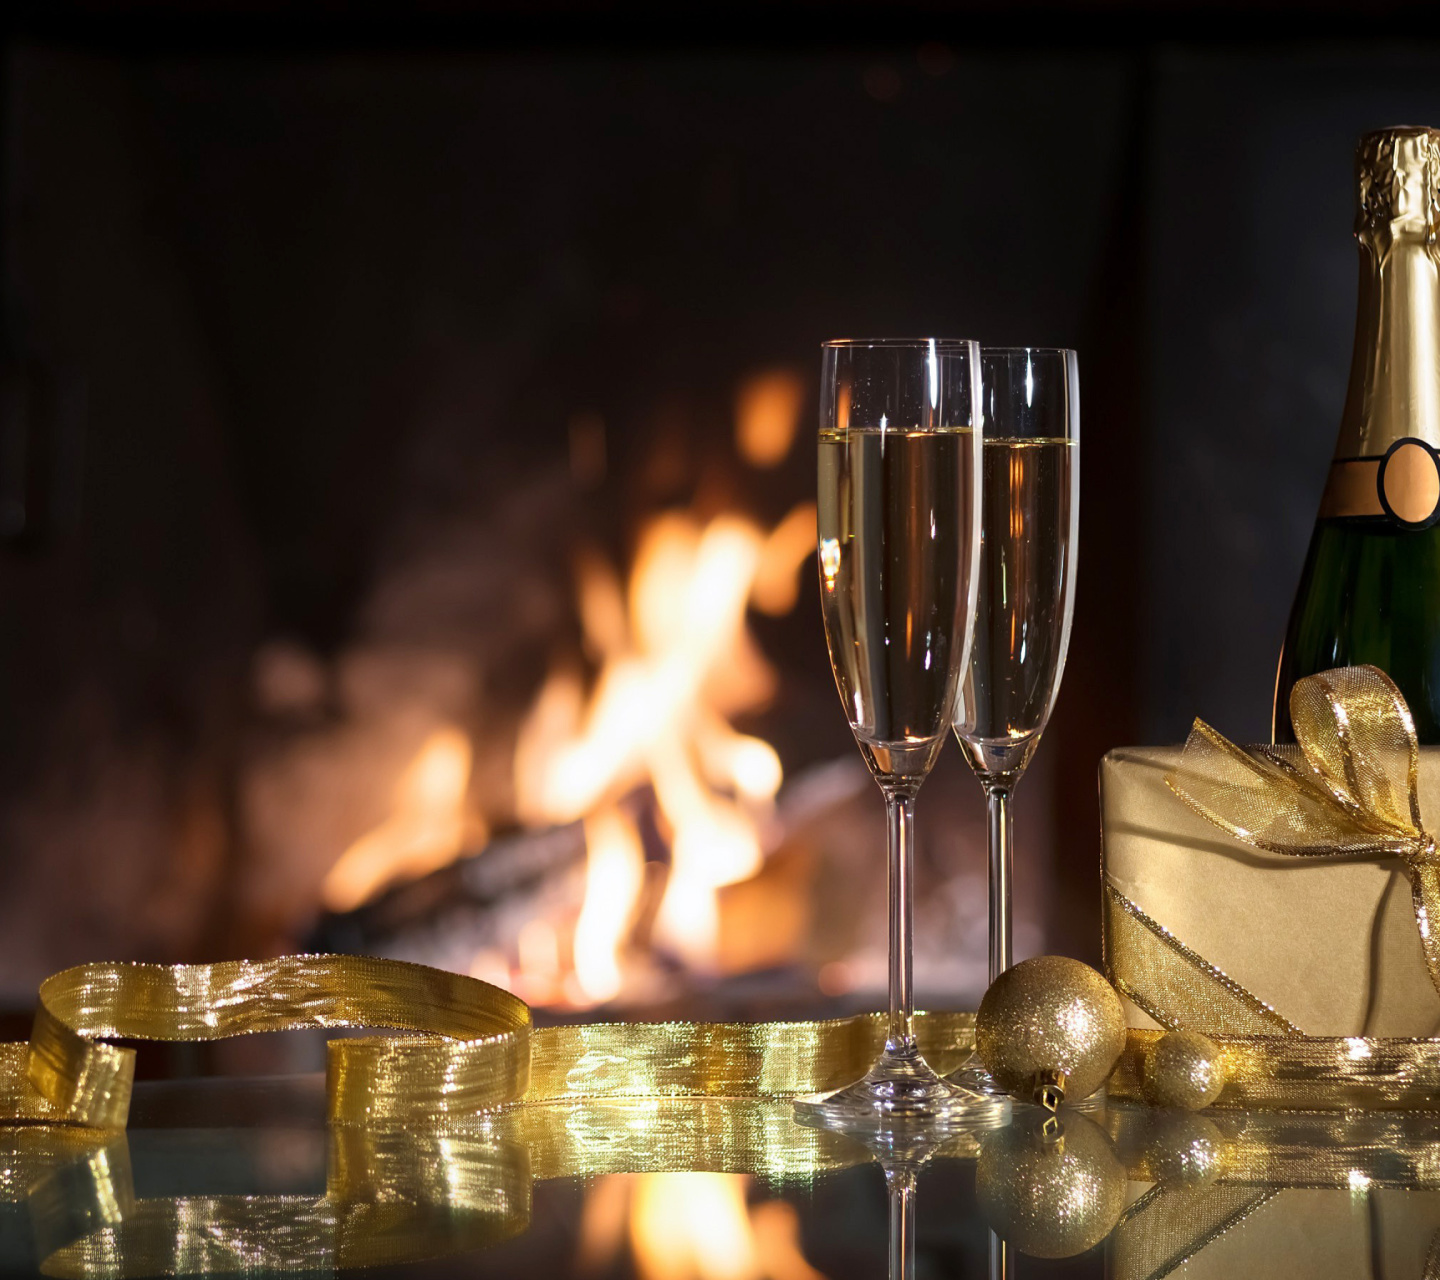 Champagne and Fireplace wallpaper 1440x1280